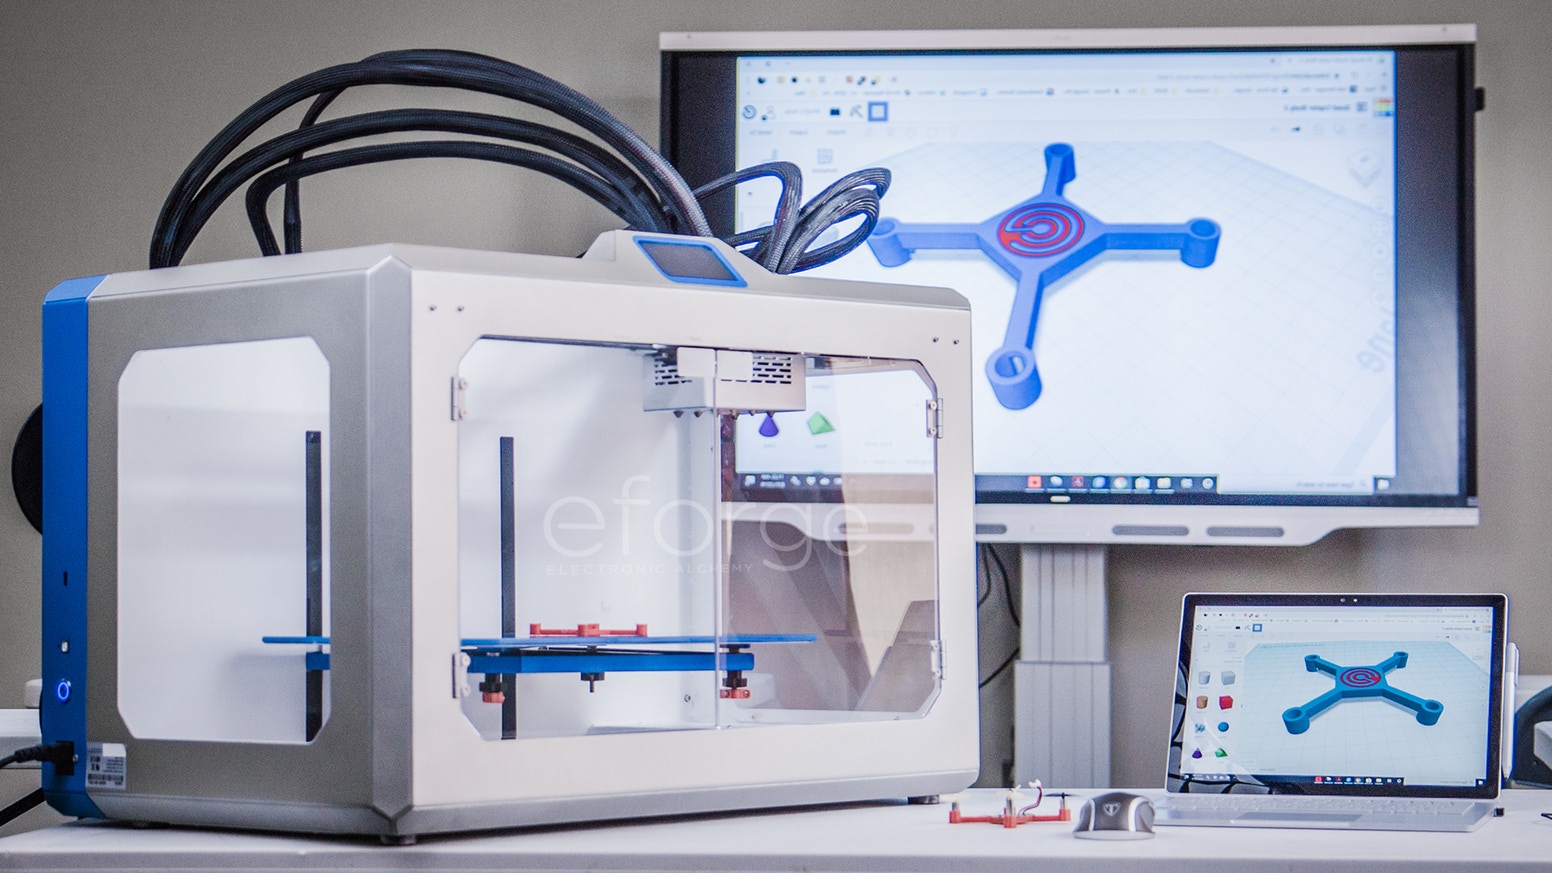 Electronic Alchemy’s eForge 3D printer, developed with NASA funding, can print electronic devices on demand. 